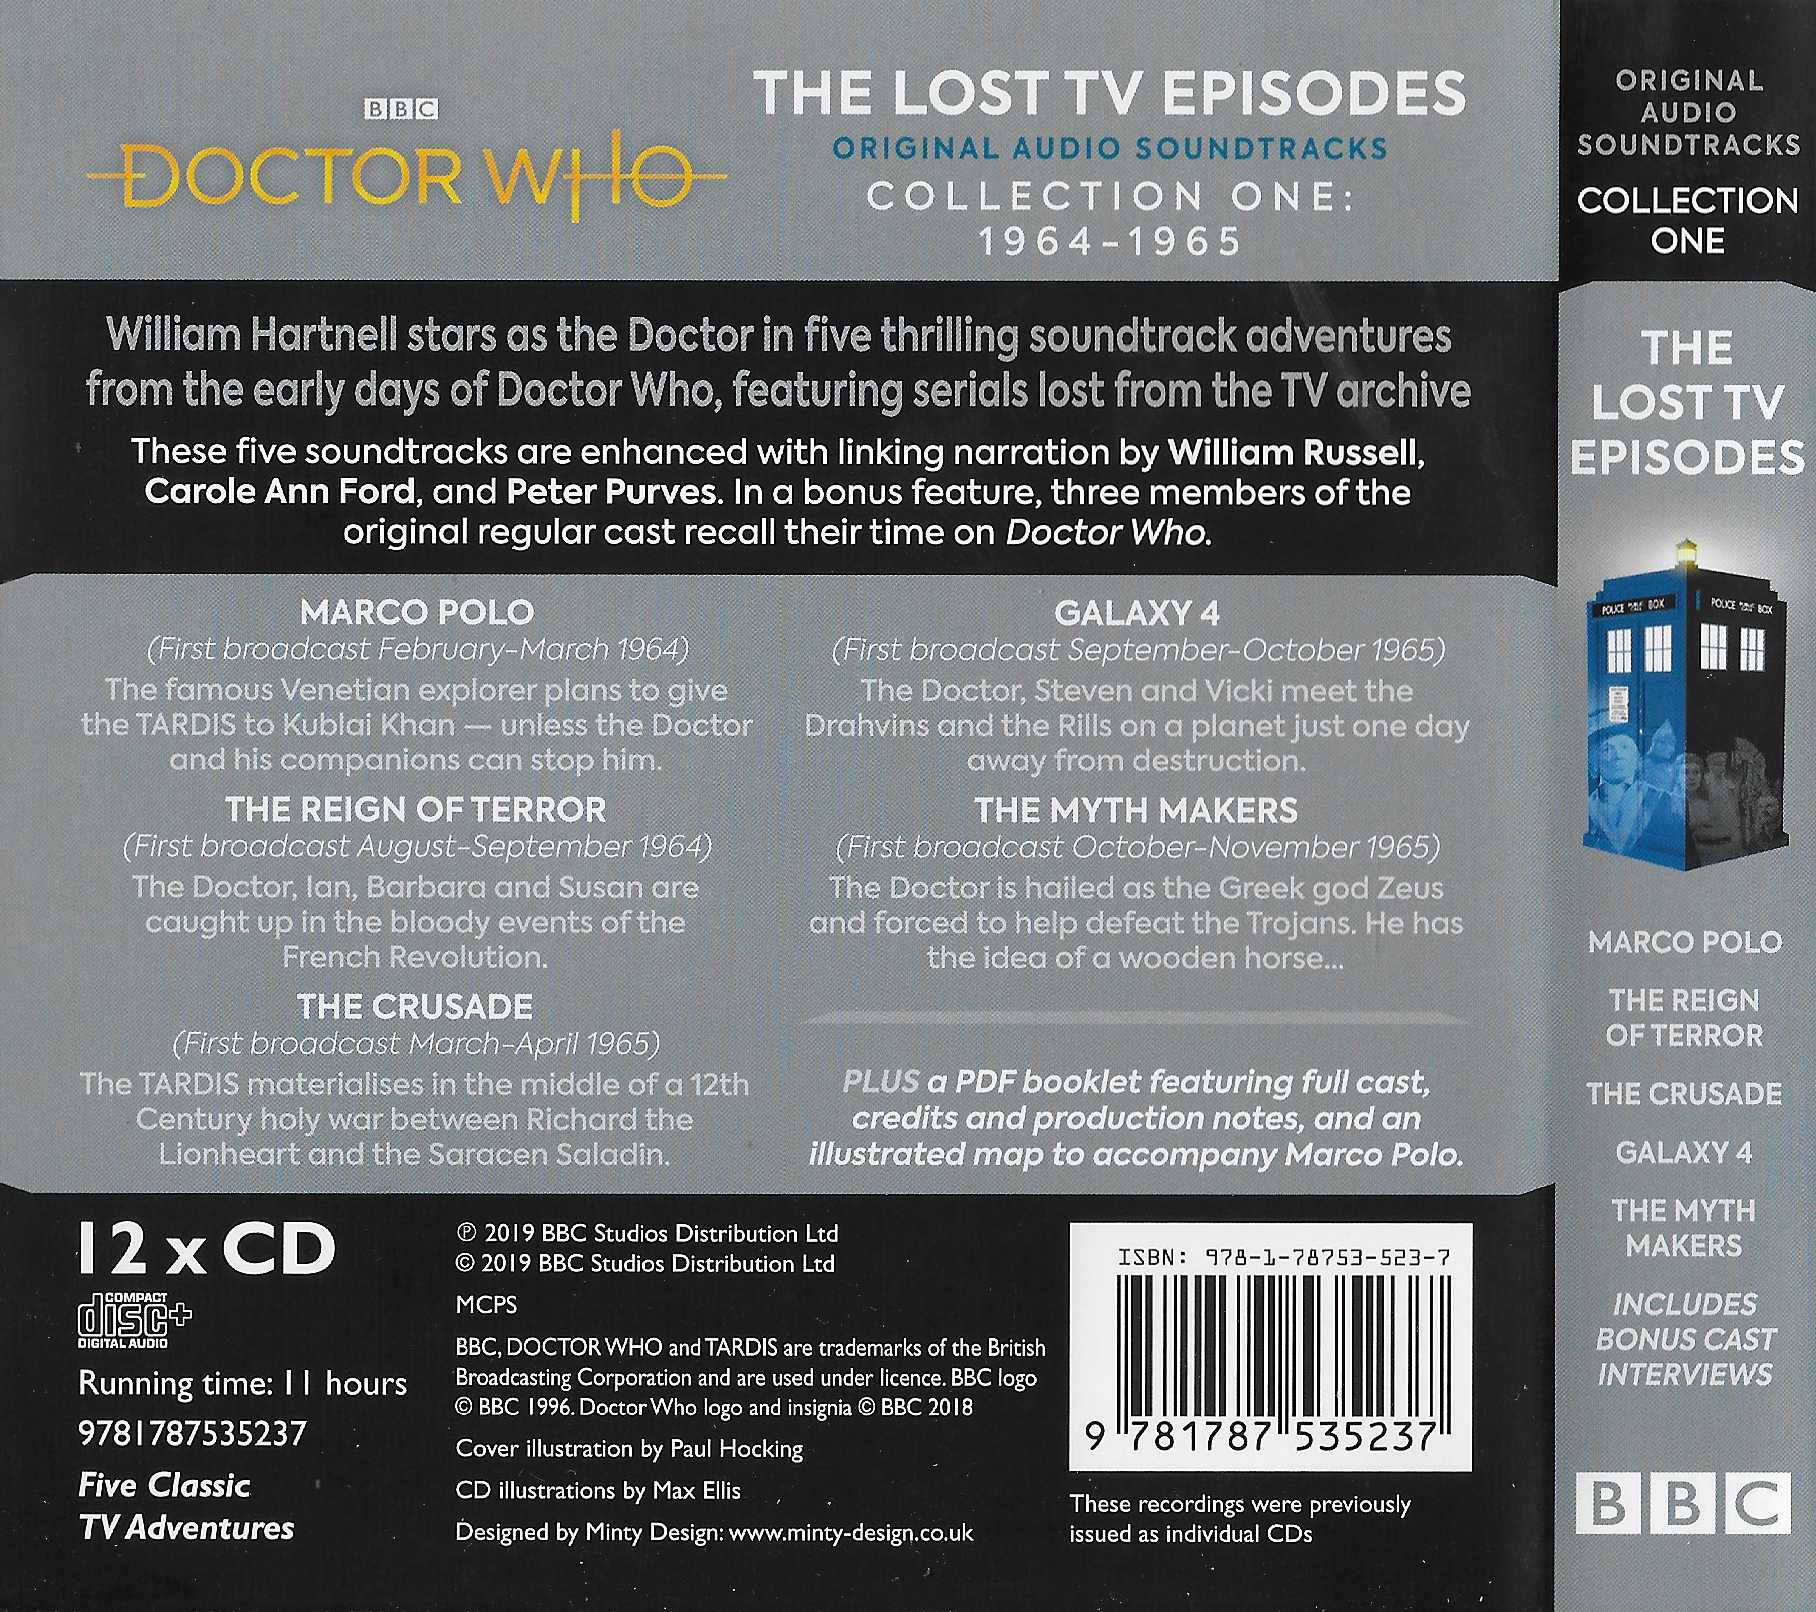 Picture of ISBN 978-1-78753-523-7 Doctor Who - The lost TV episodes - Collection one: 1964-1965 by artist Various from the BBC records and Tapes library